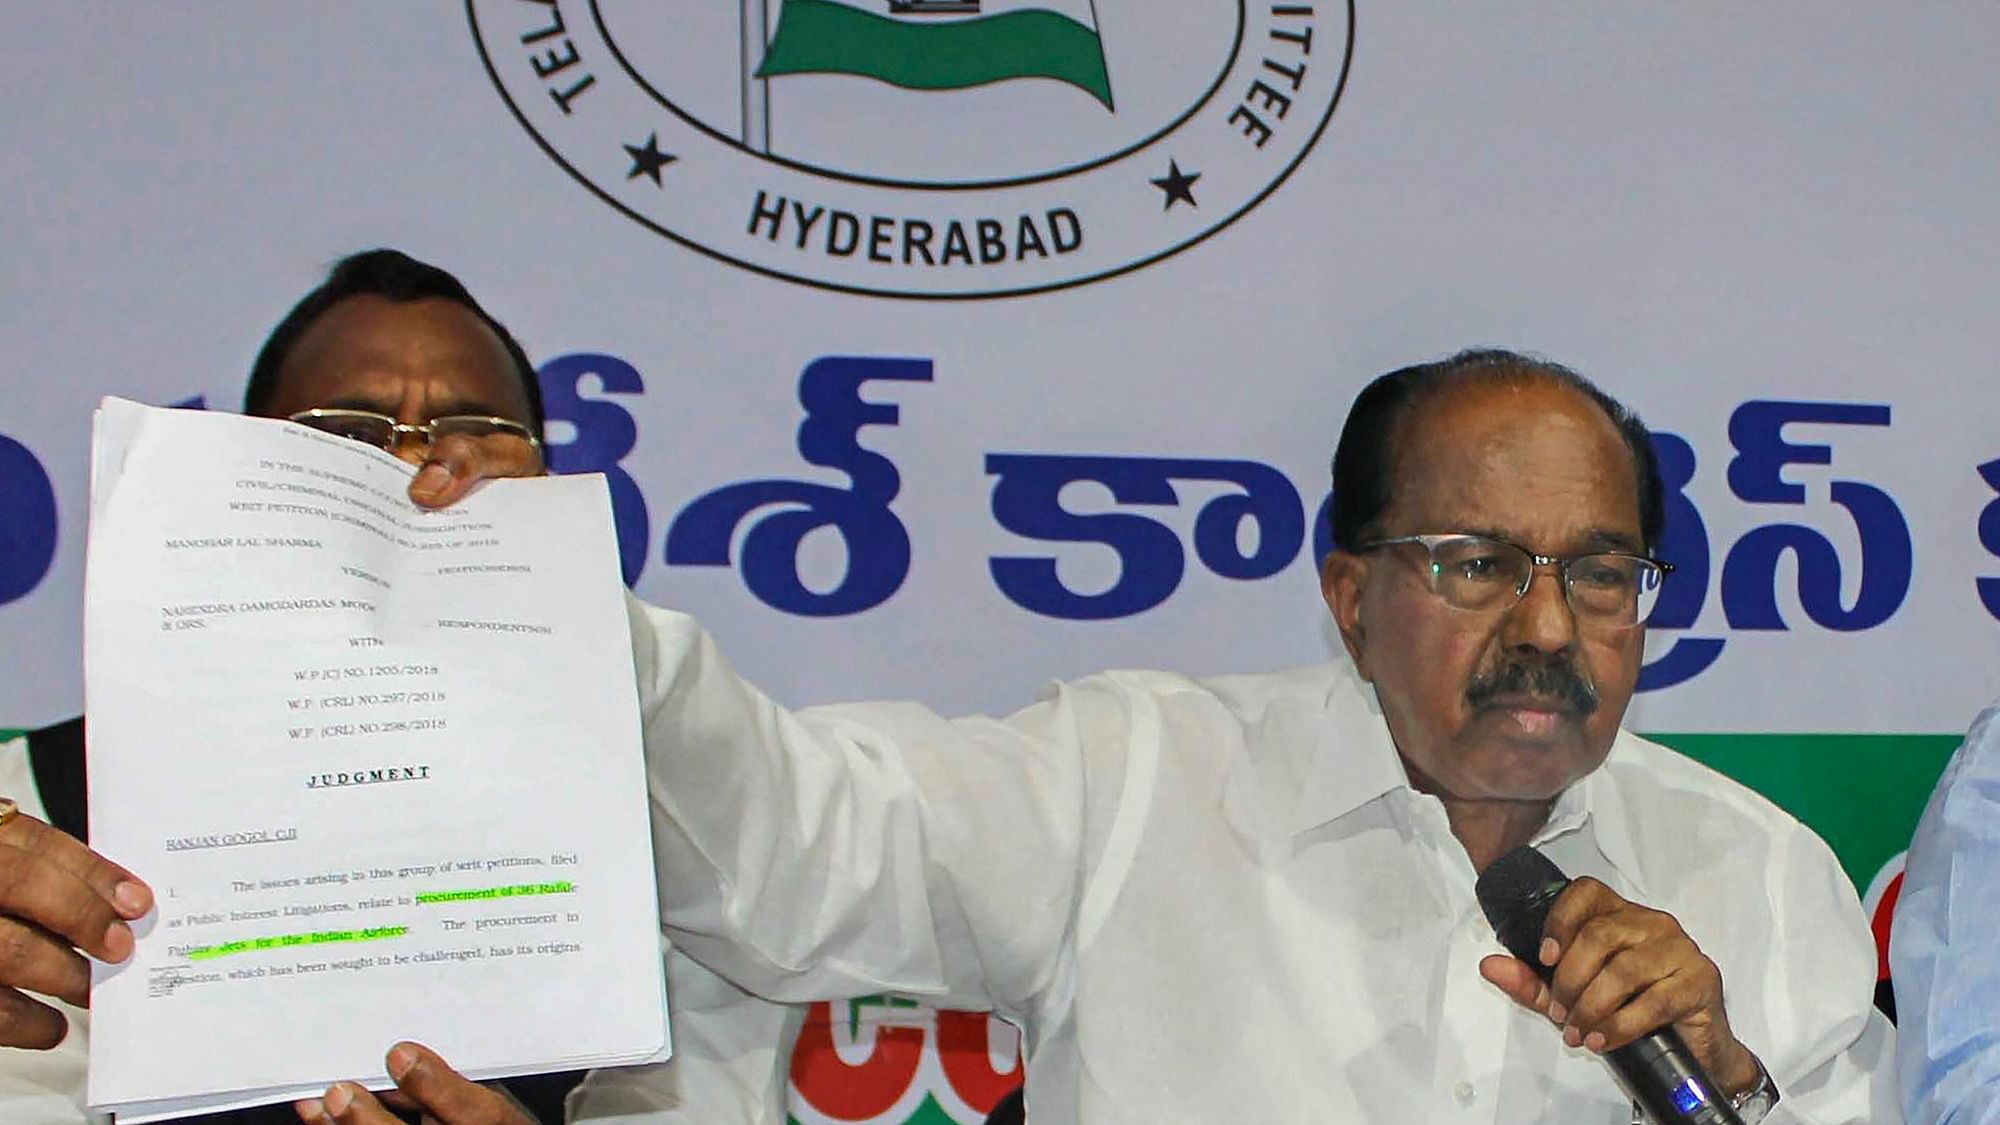 Parliamentary Standing Committee chairperson Veerappa Moily shows the copy of the Supreme Court order regarding Rafale Deal during a press conference in Hyderabad on 20 December.